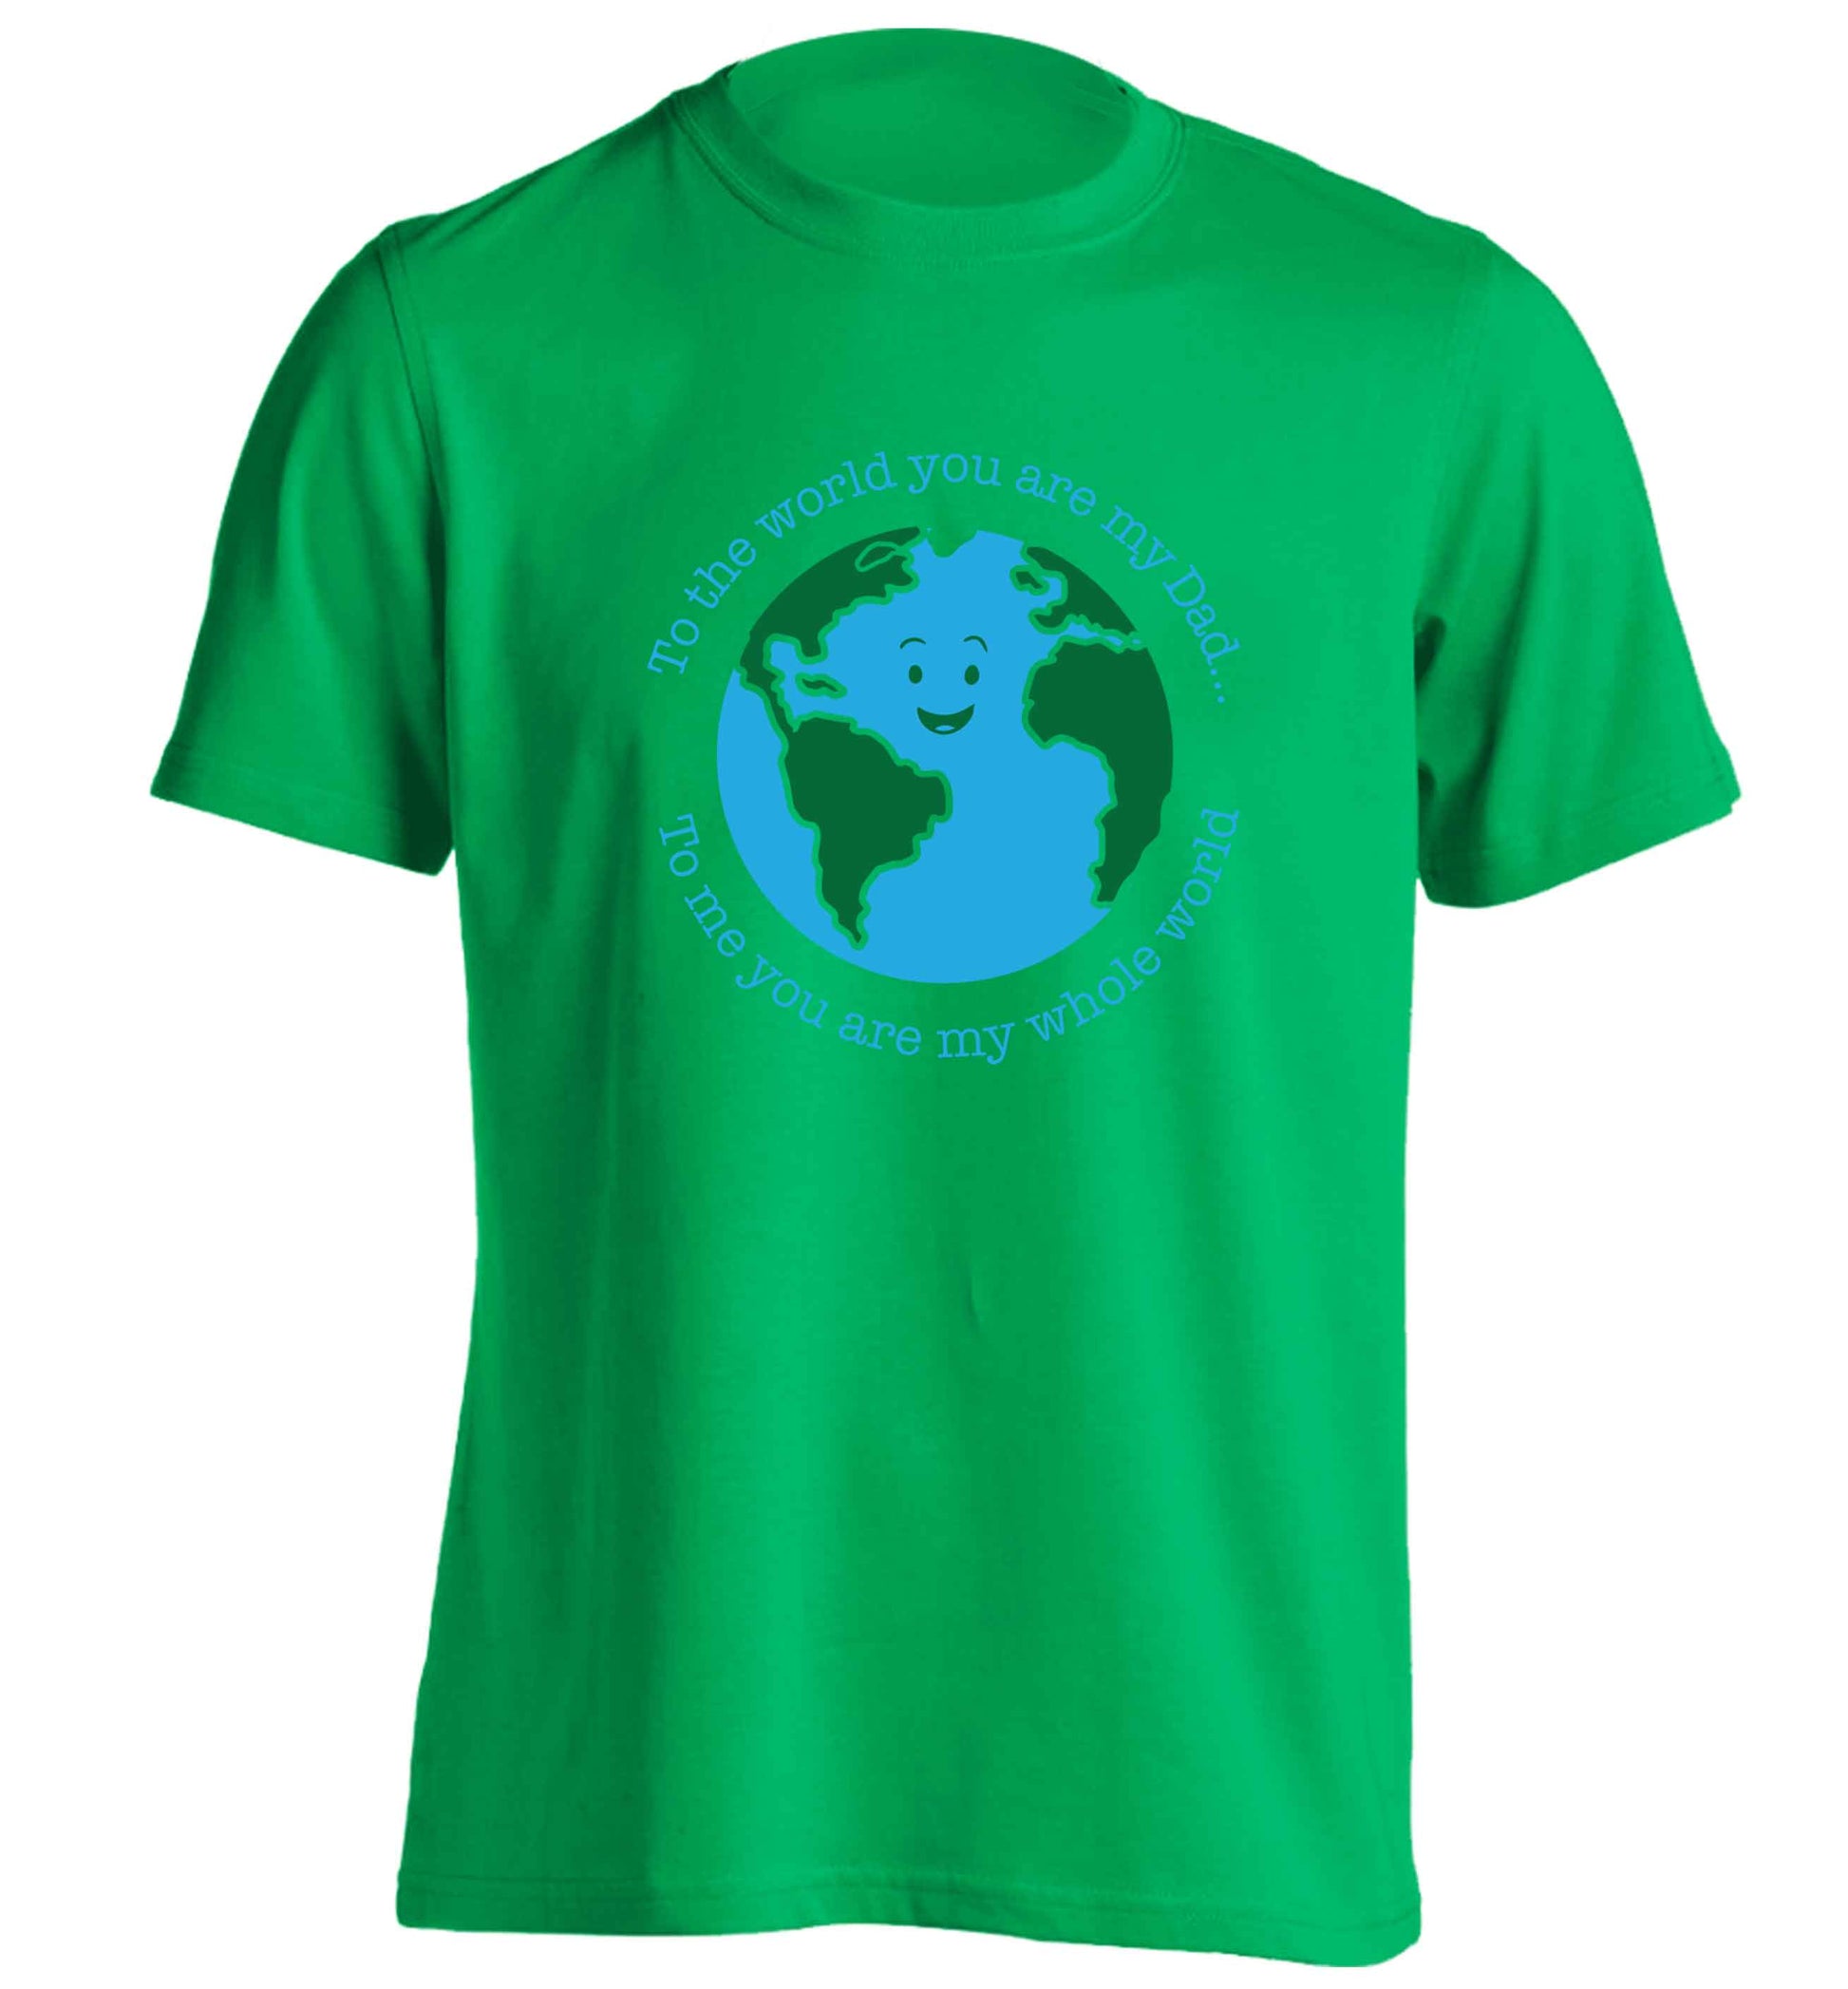 To the world you are my dad, to me you are my whole world adults unisex green Tshirt 2XL